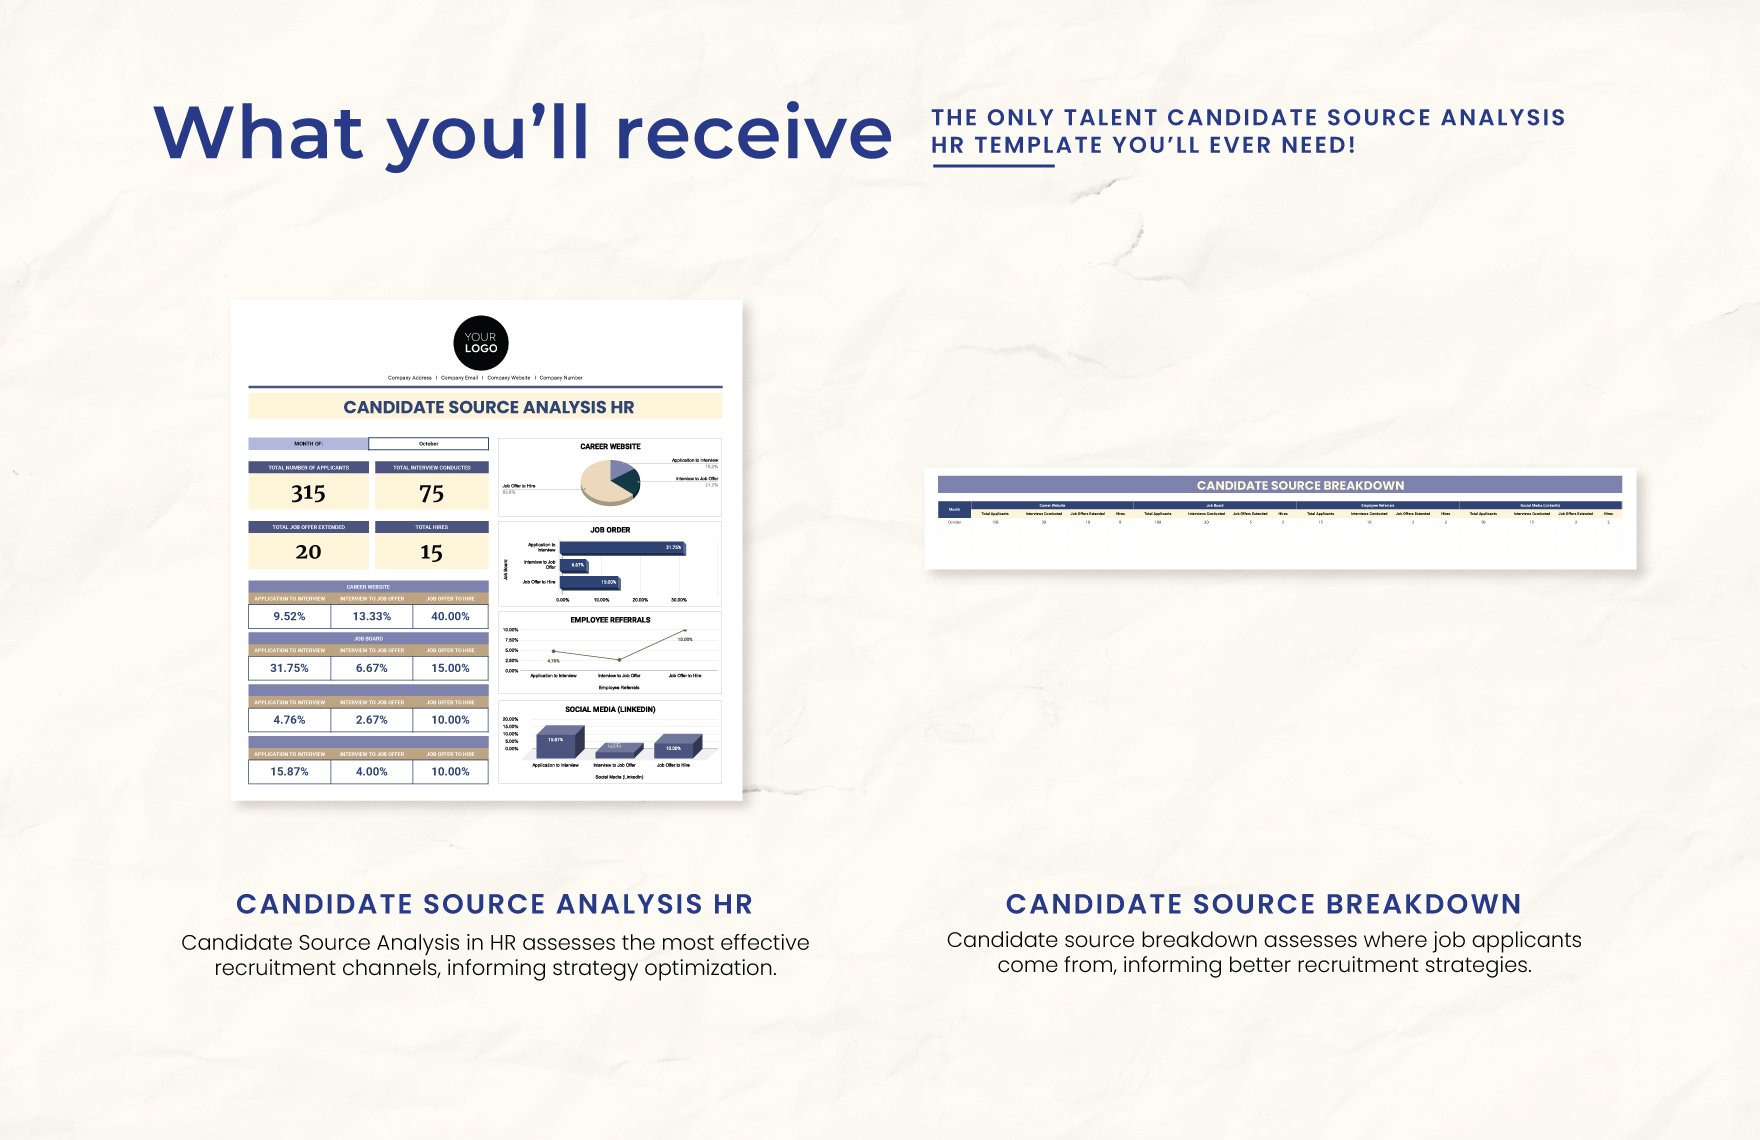 Candidate Source Analysis HR Template